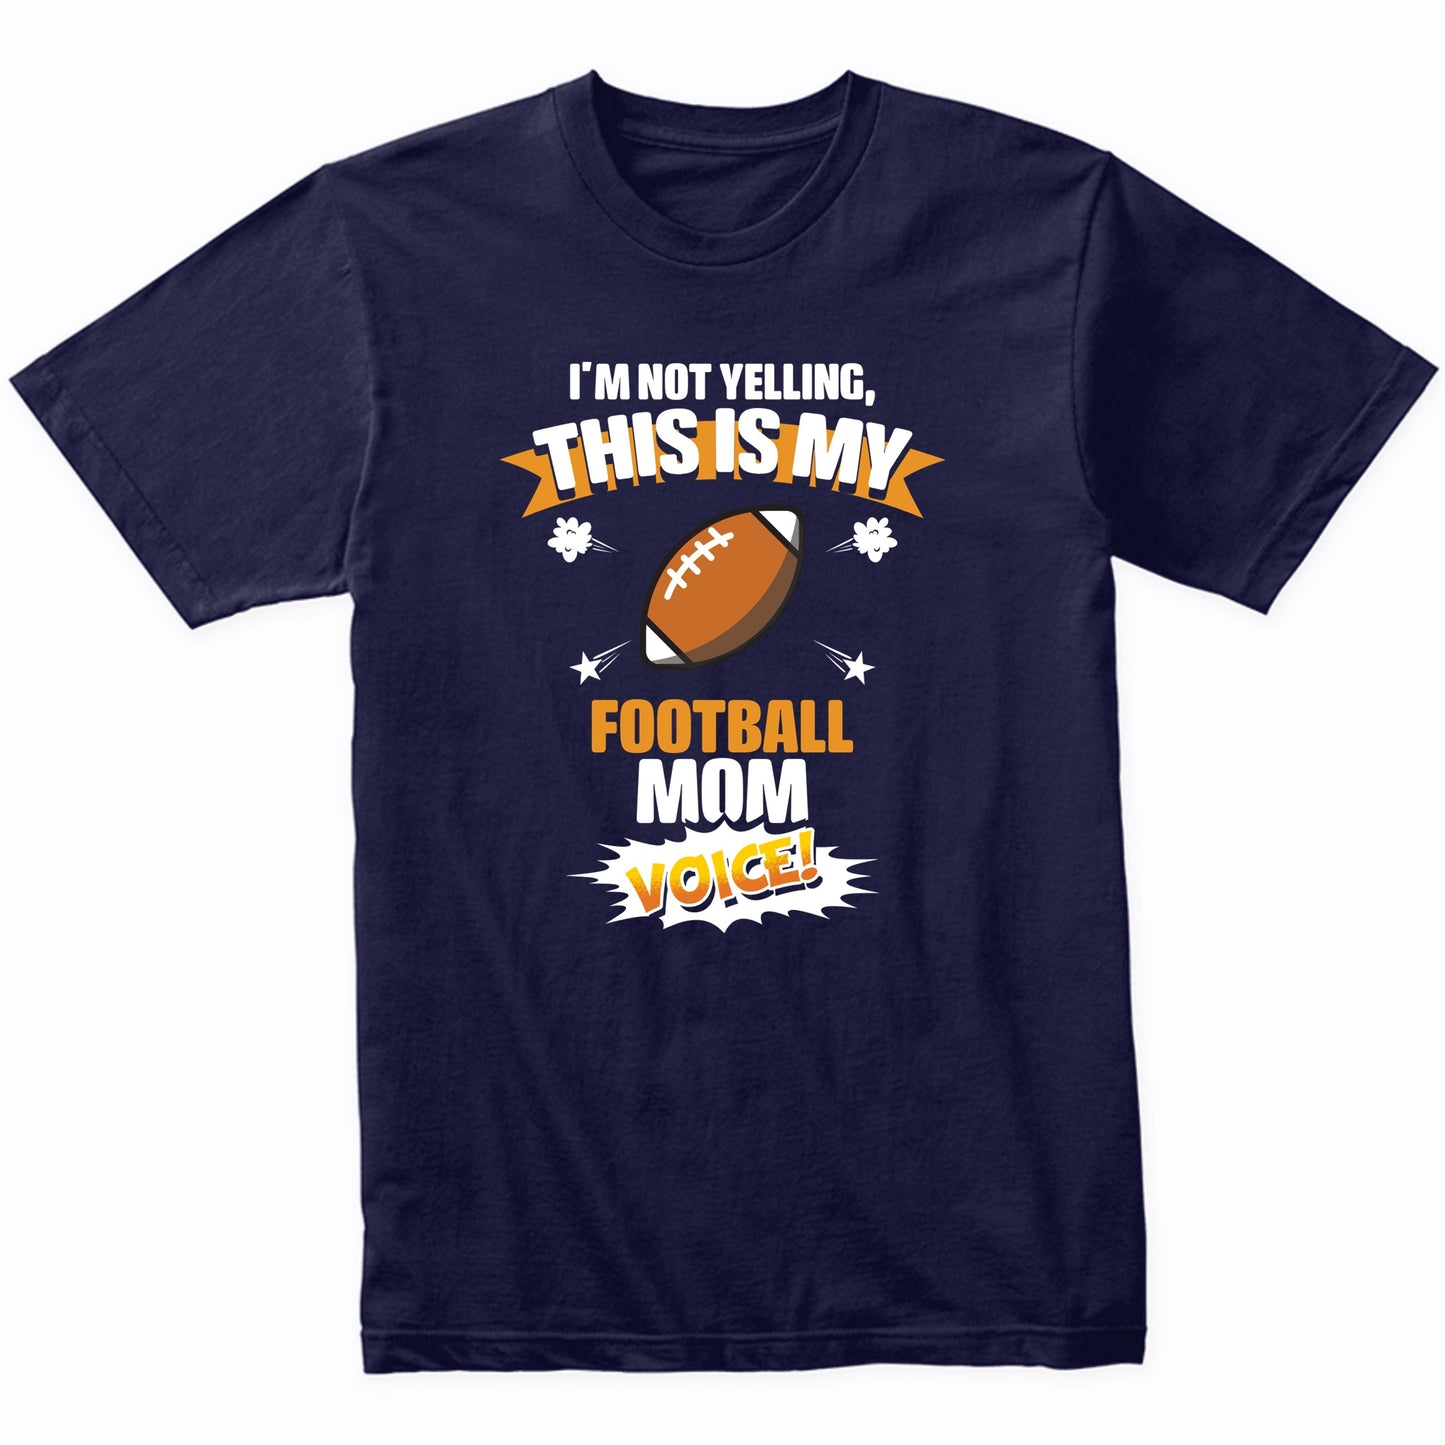 I'm Not Yelling This Is My Football Mom Voice Funny T-Shirt